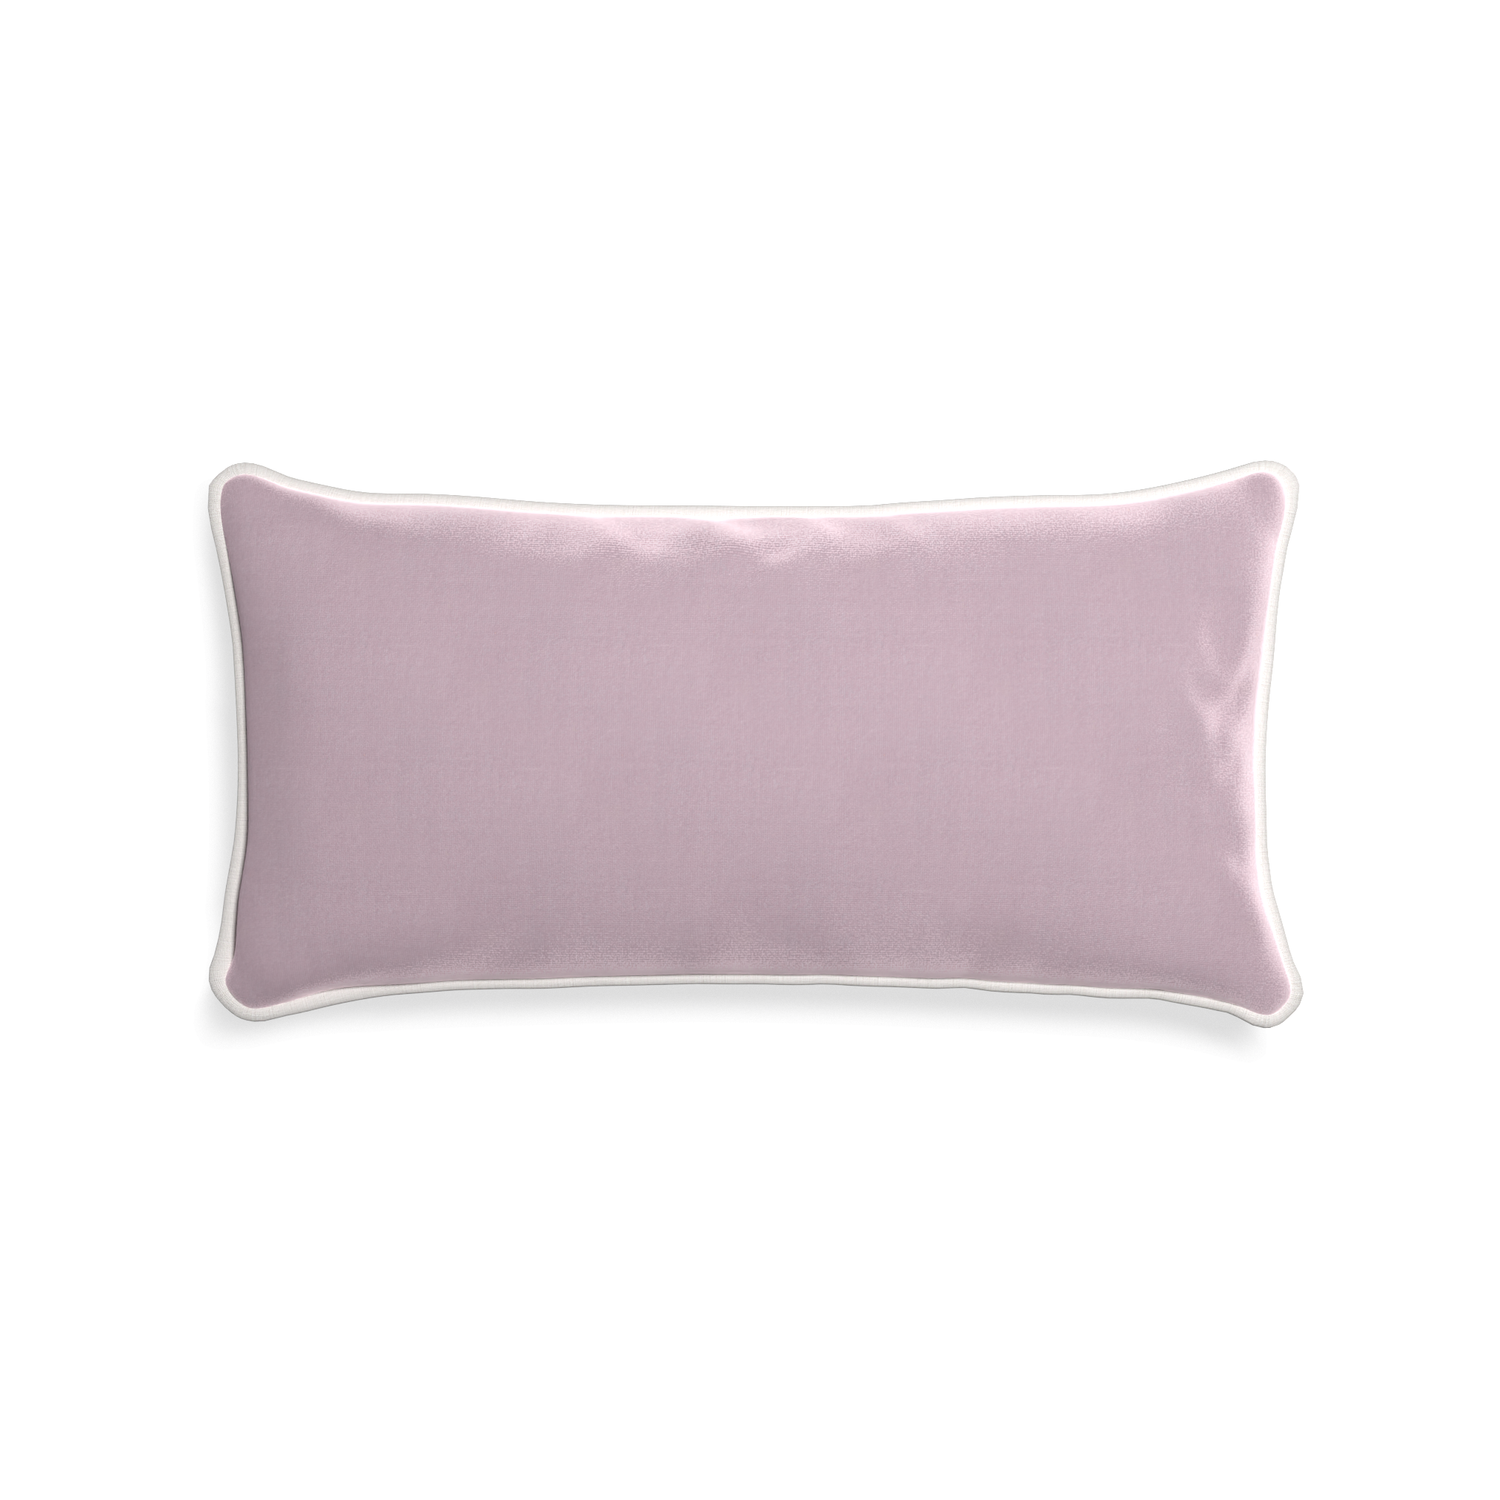 Midi-lumbar lilac velvet custom lilacpillow with snow piping on white background